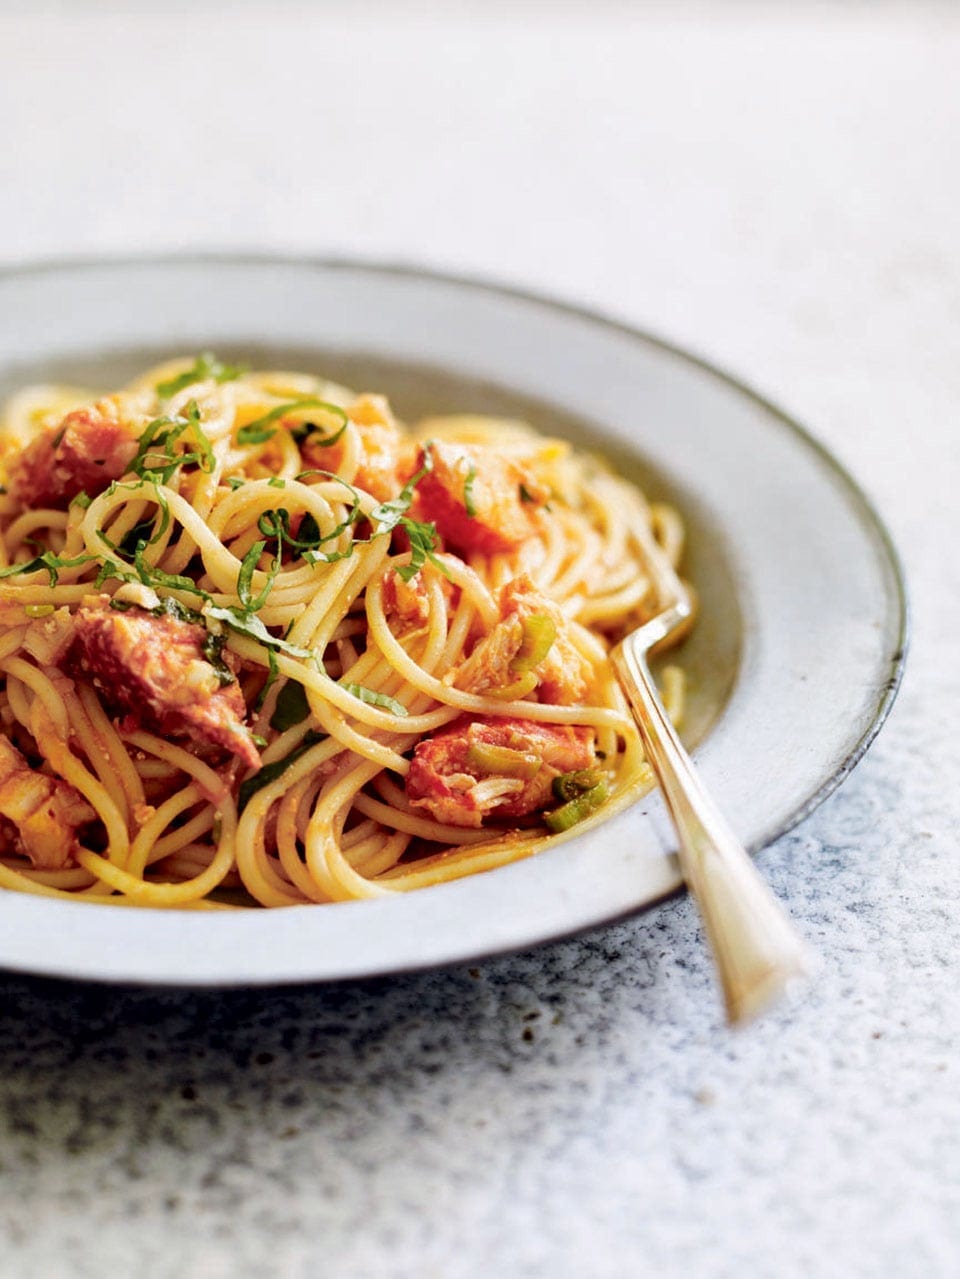 Lobster spaghetti with tomato ginger and basil recipe | delicious. magazine